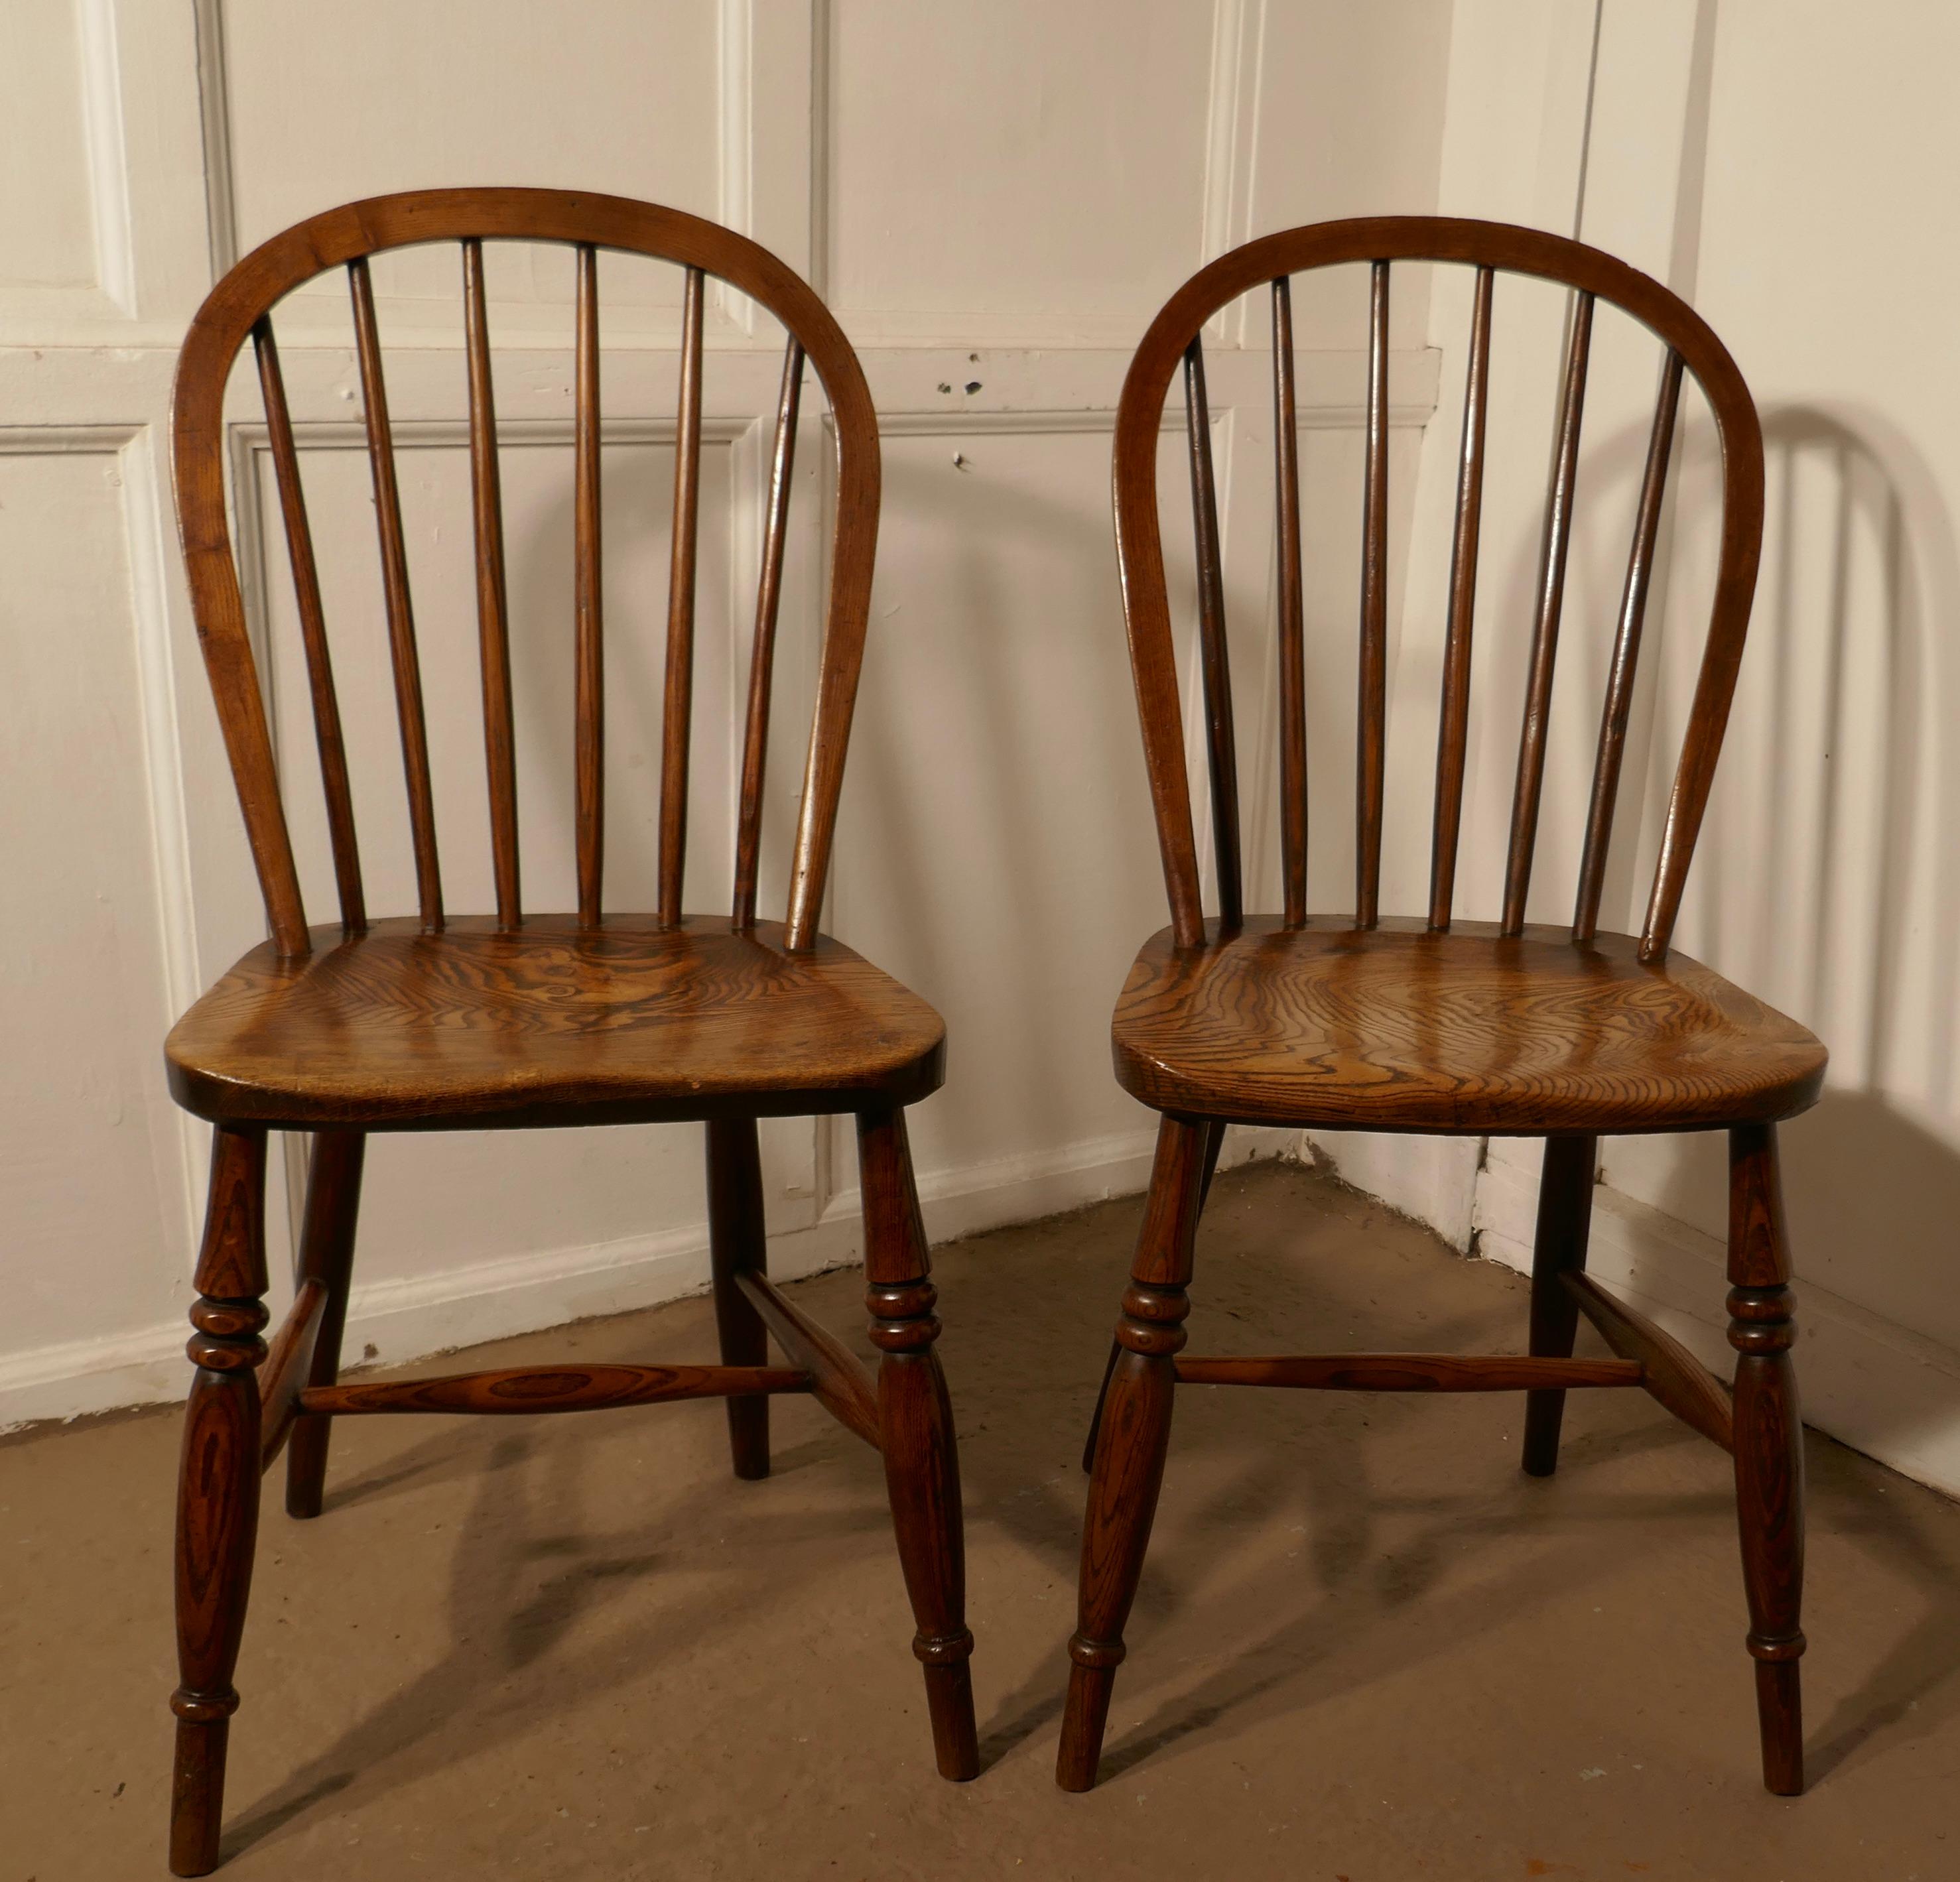 A pair of solid ash windsor hoop back chairs


The chairs are a Classic design and traditionally made from solid wood they are in the traditional Windsor style with a Hooped back
These are very sturdy chairs they are very sound and well made,